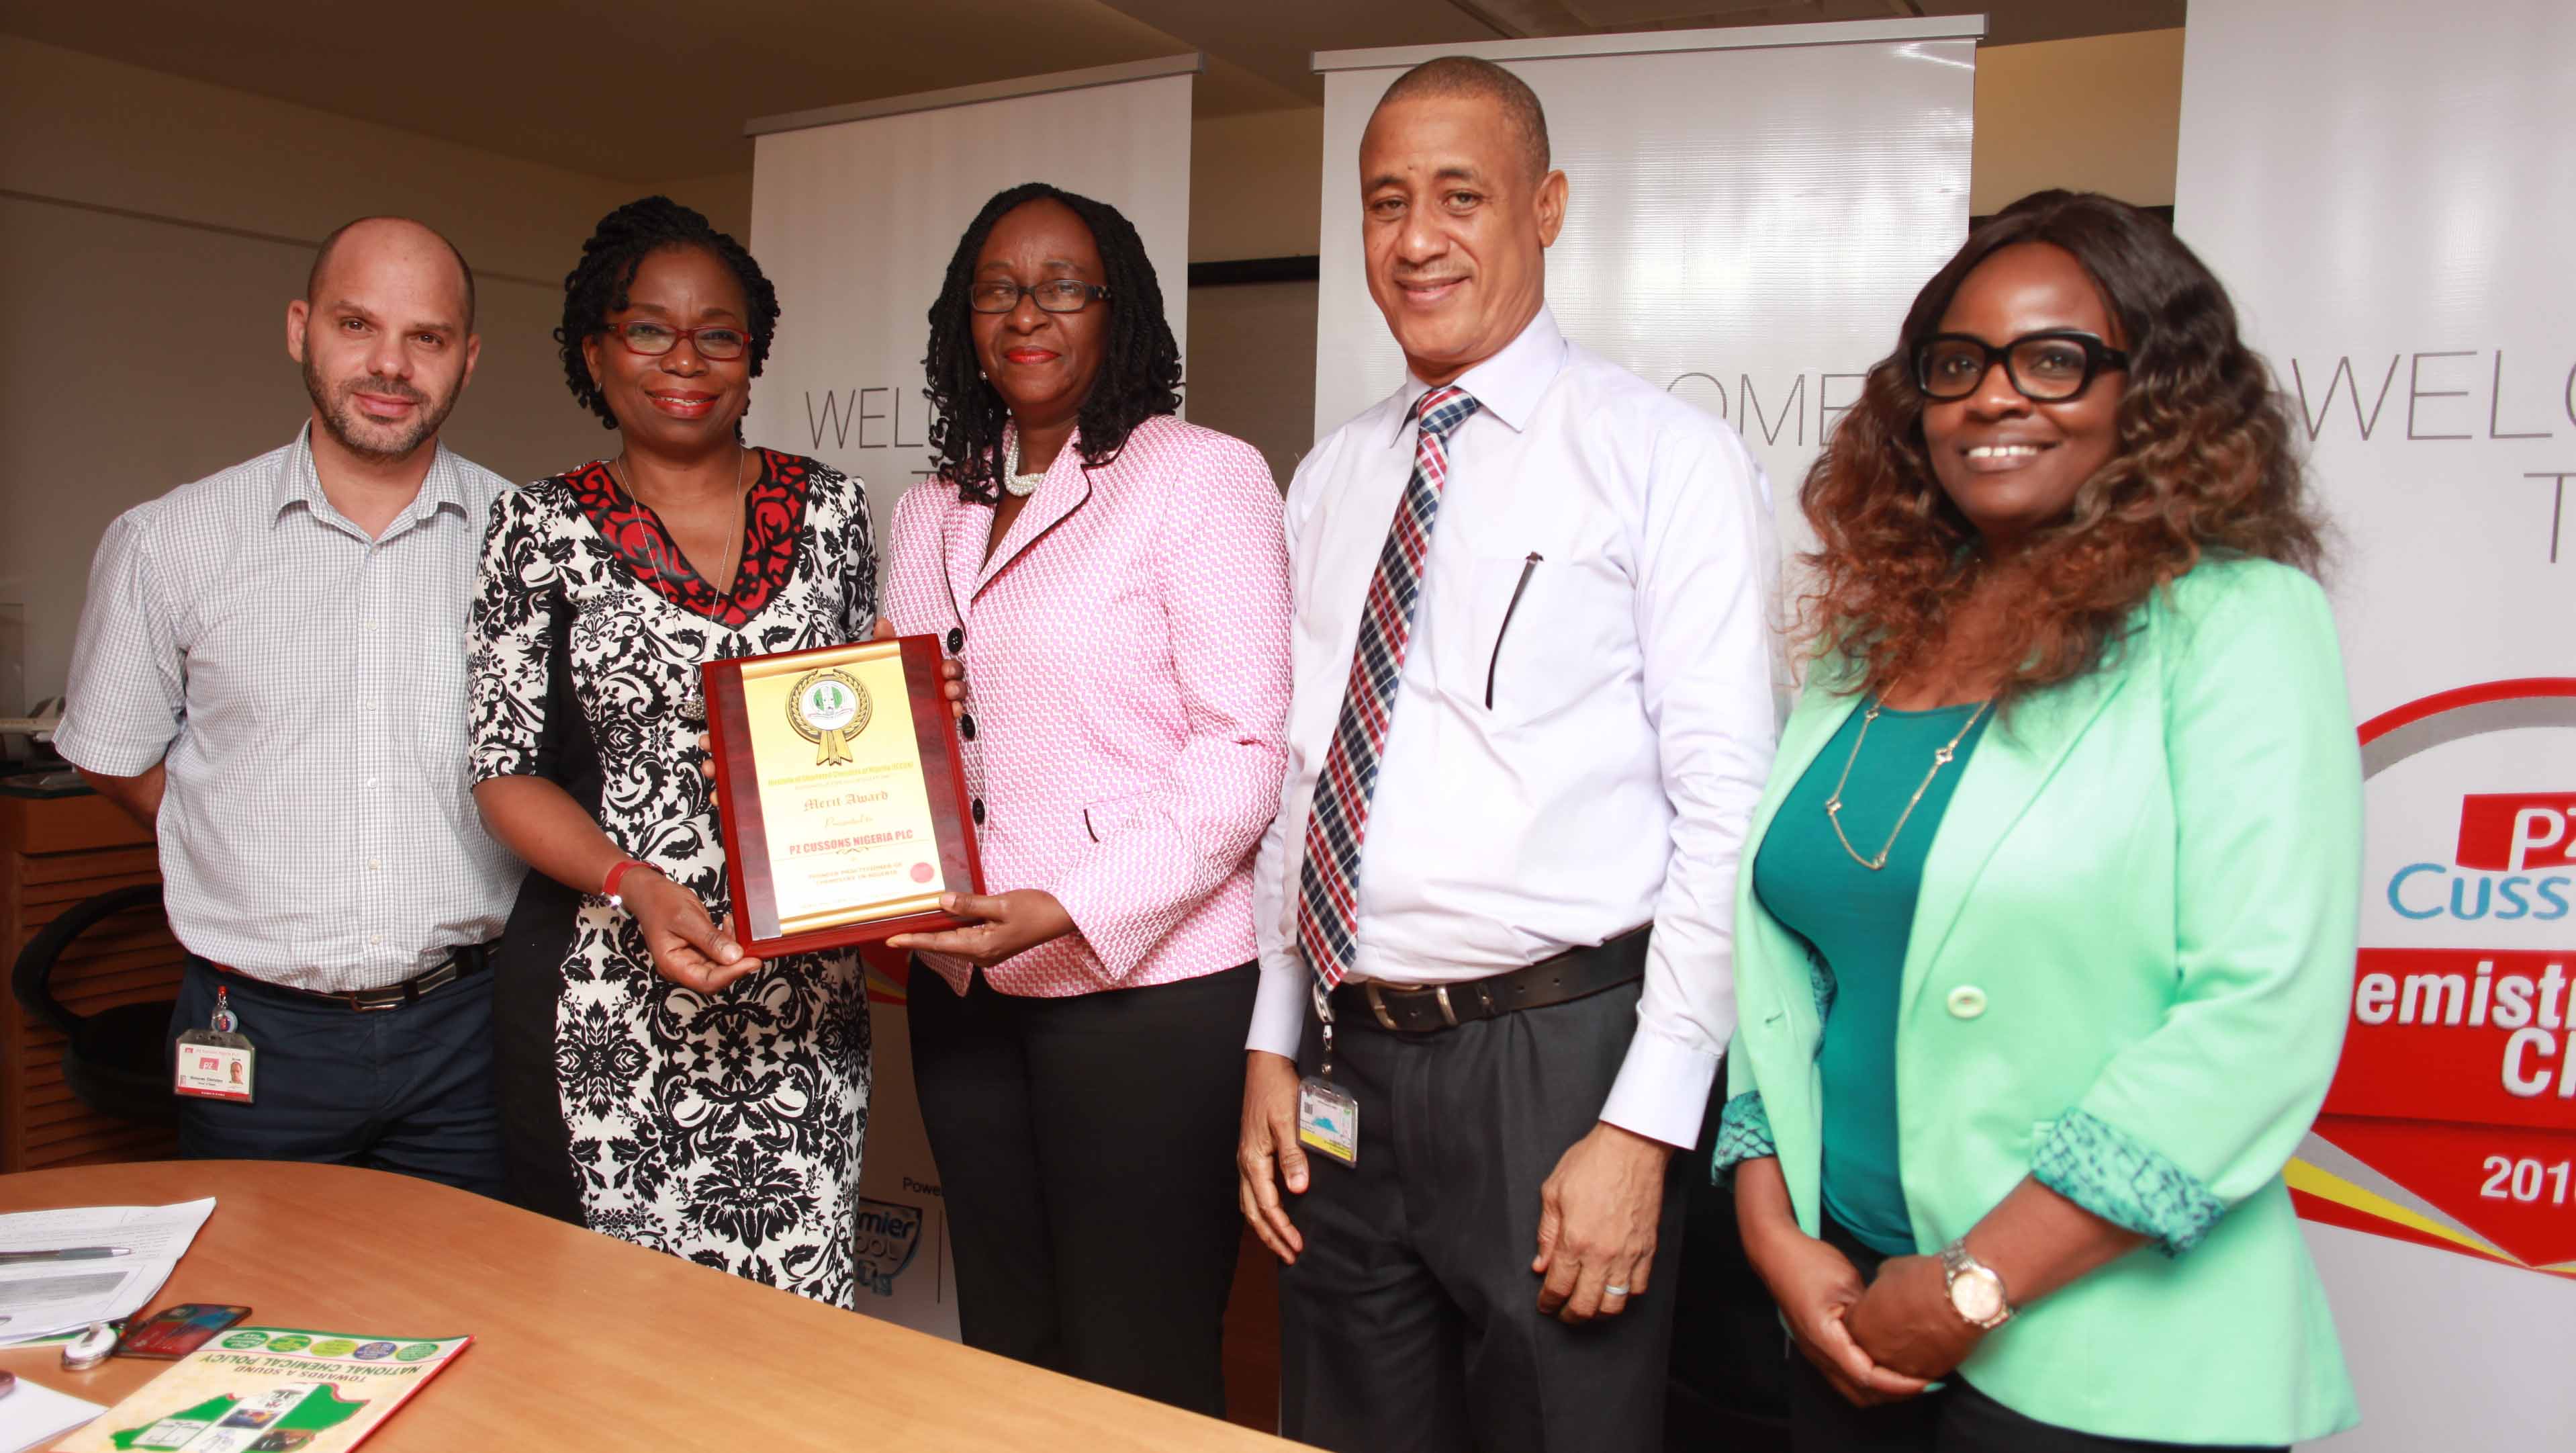 ICCON Recognizes PZCussons for Supporting the Learning of Chemistry in Nigeria-marketingspace.com.ng